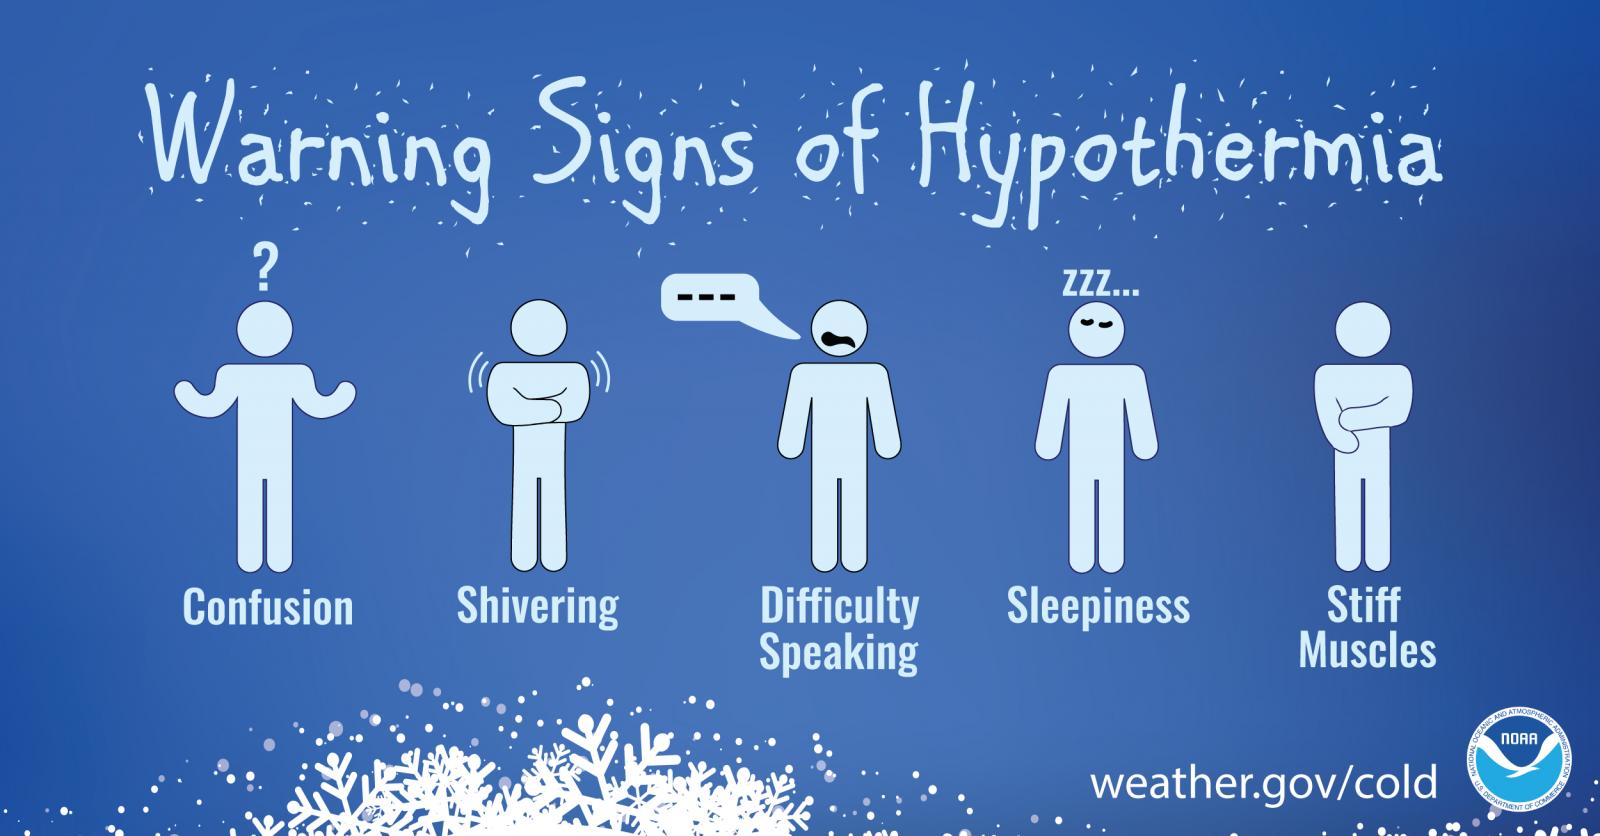 Image of figures with warning signs of hypothermia including confusion, shivering, difficulty speaking, sleepiness, and stiff muscles, 